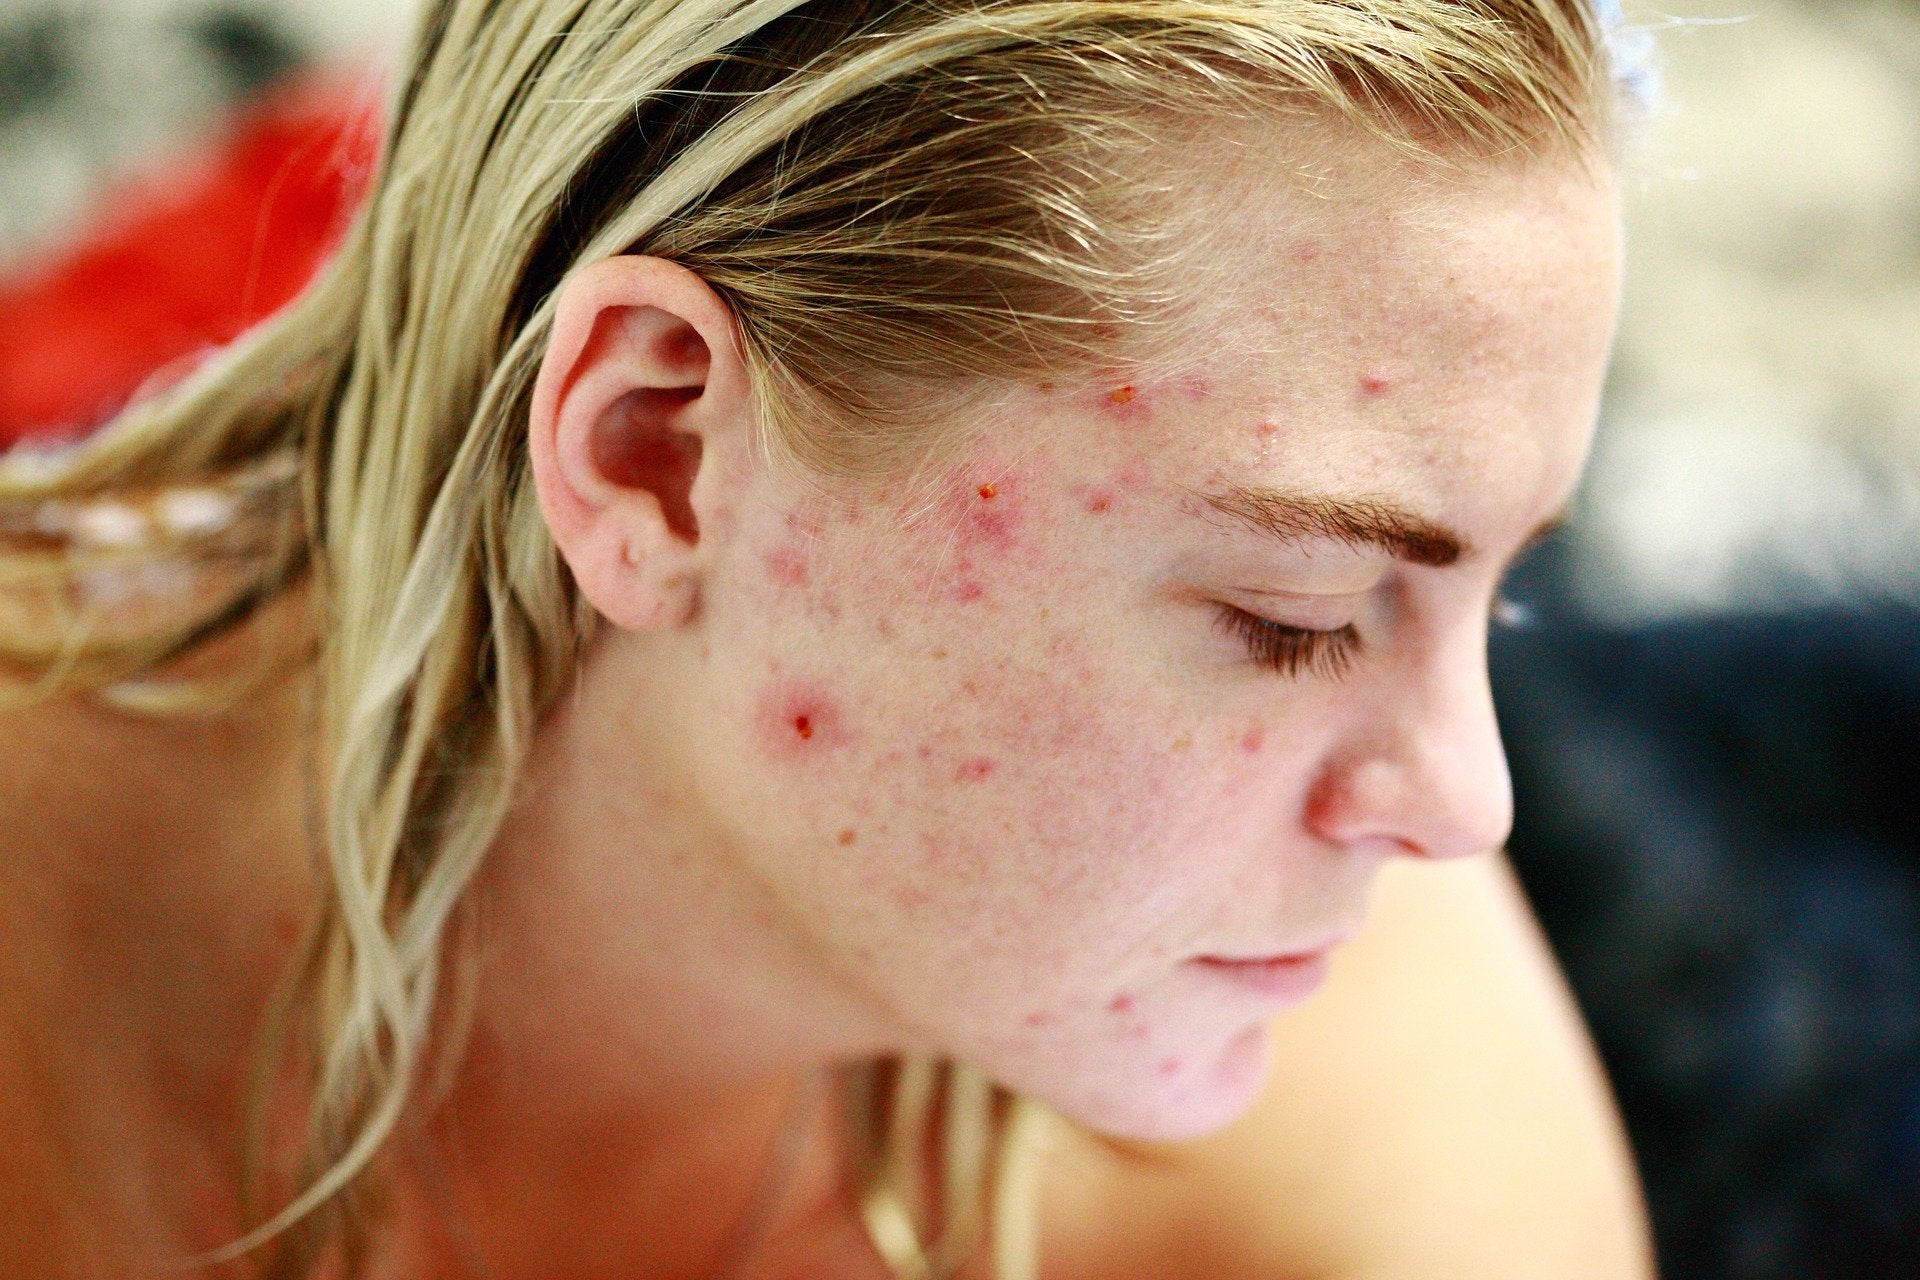 Ways To End Pimples Naturally At Home